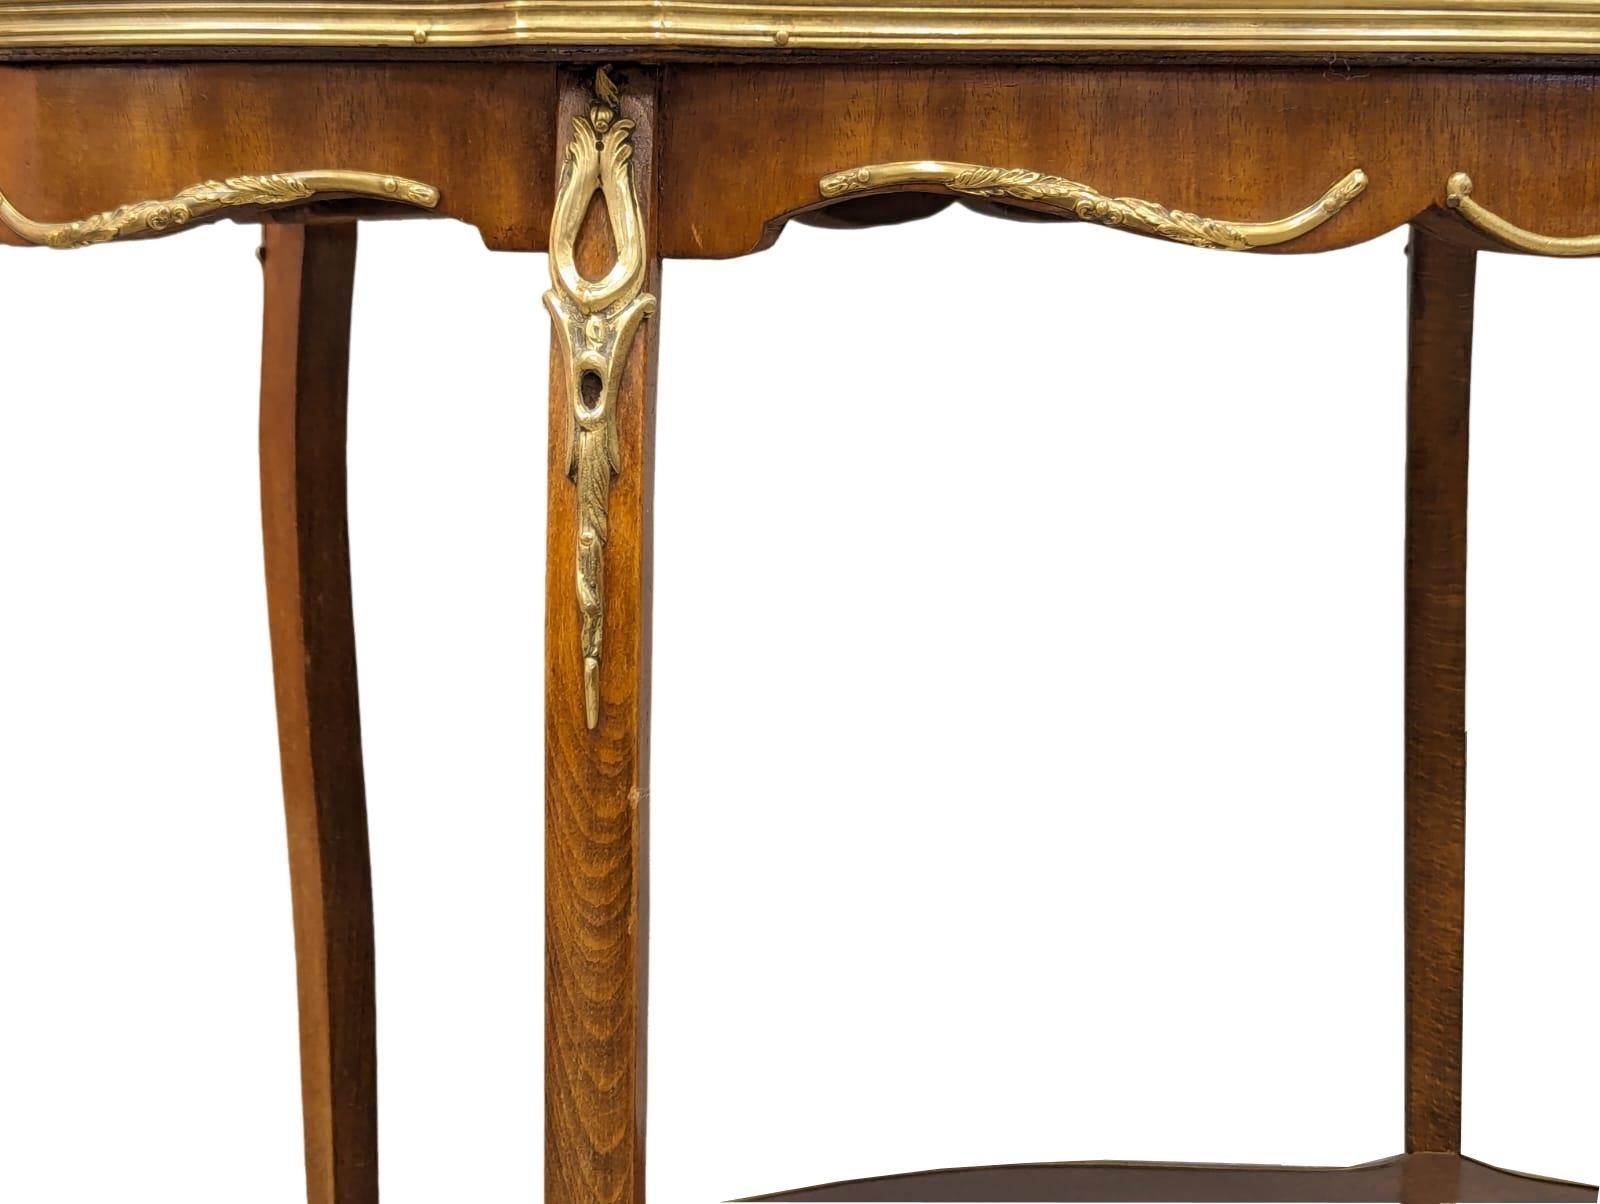 An Early 20th Century, French 18th Century style, inlaid brass bound Etagere. 85.5x54.5x71.5cm - Image 4 of 6